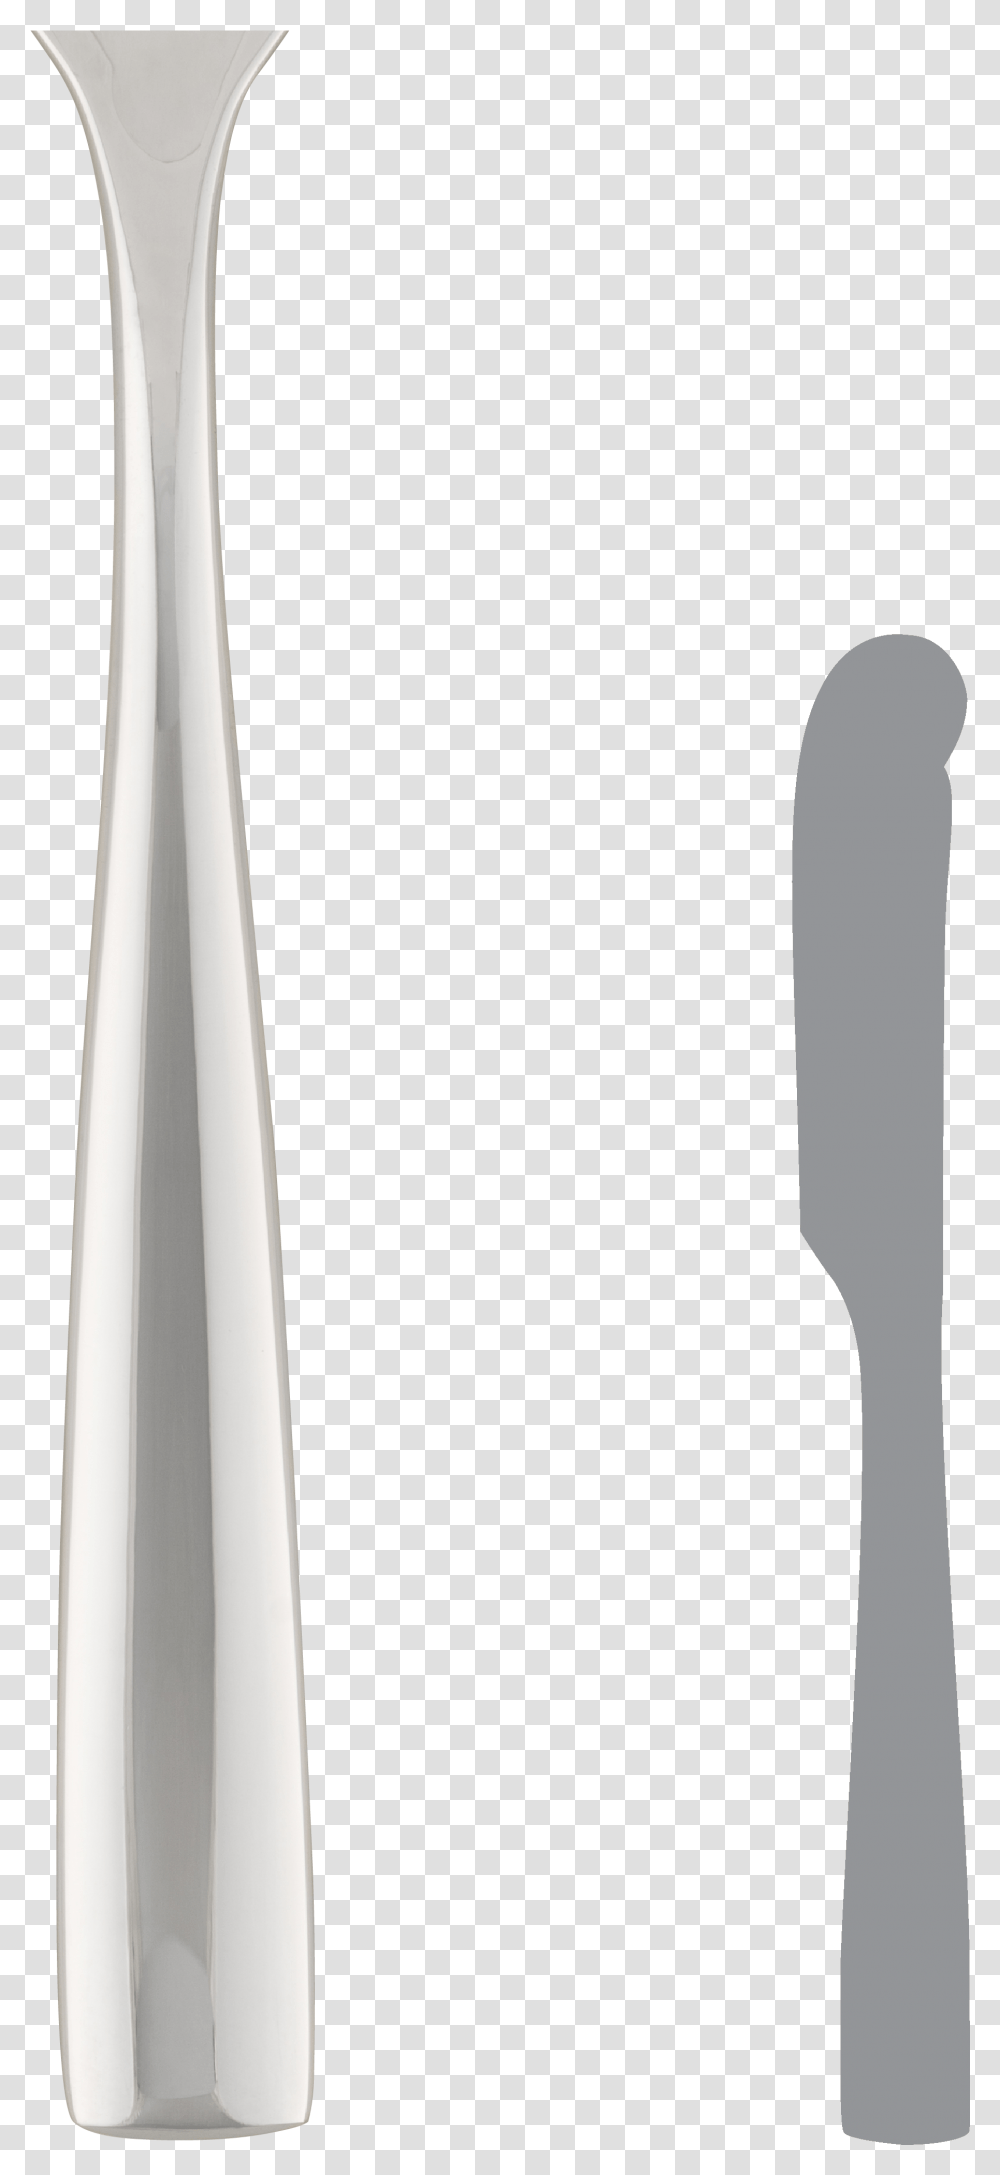 Bryce Butter Knife Brush, Fork, Cutlery, Spoon, Urban Transparent Png